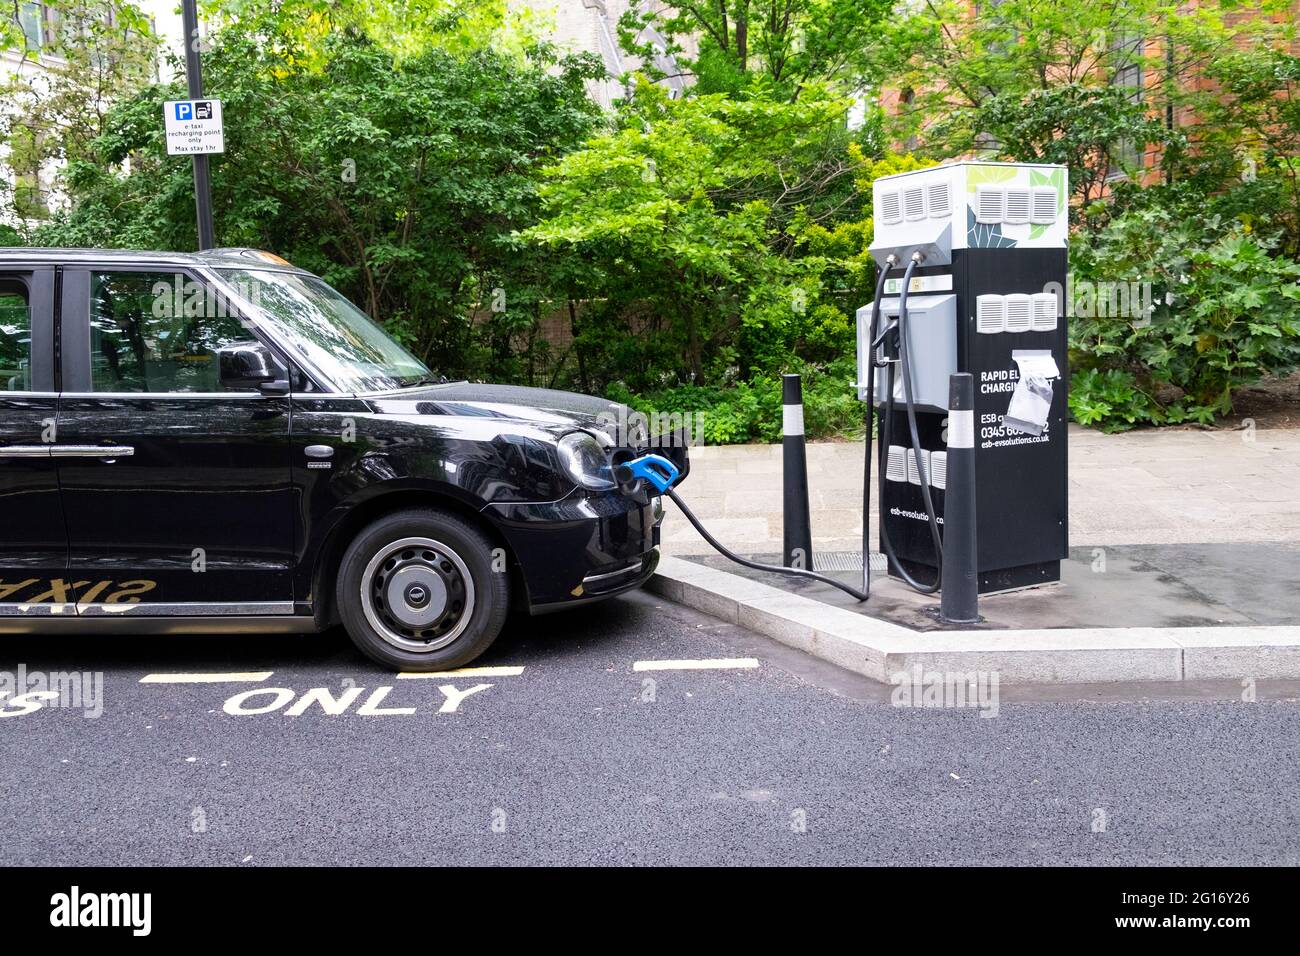 Black taxi cab recharging vehicle at an electric charging point in the City of London England UK Great Britain  KATHY DEWITT Stock Photo